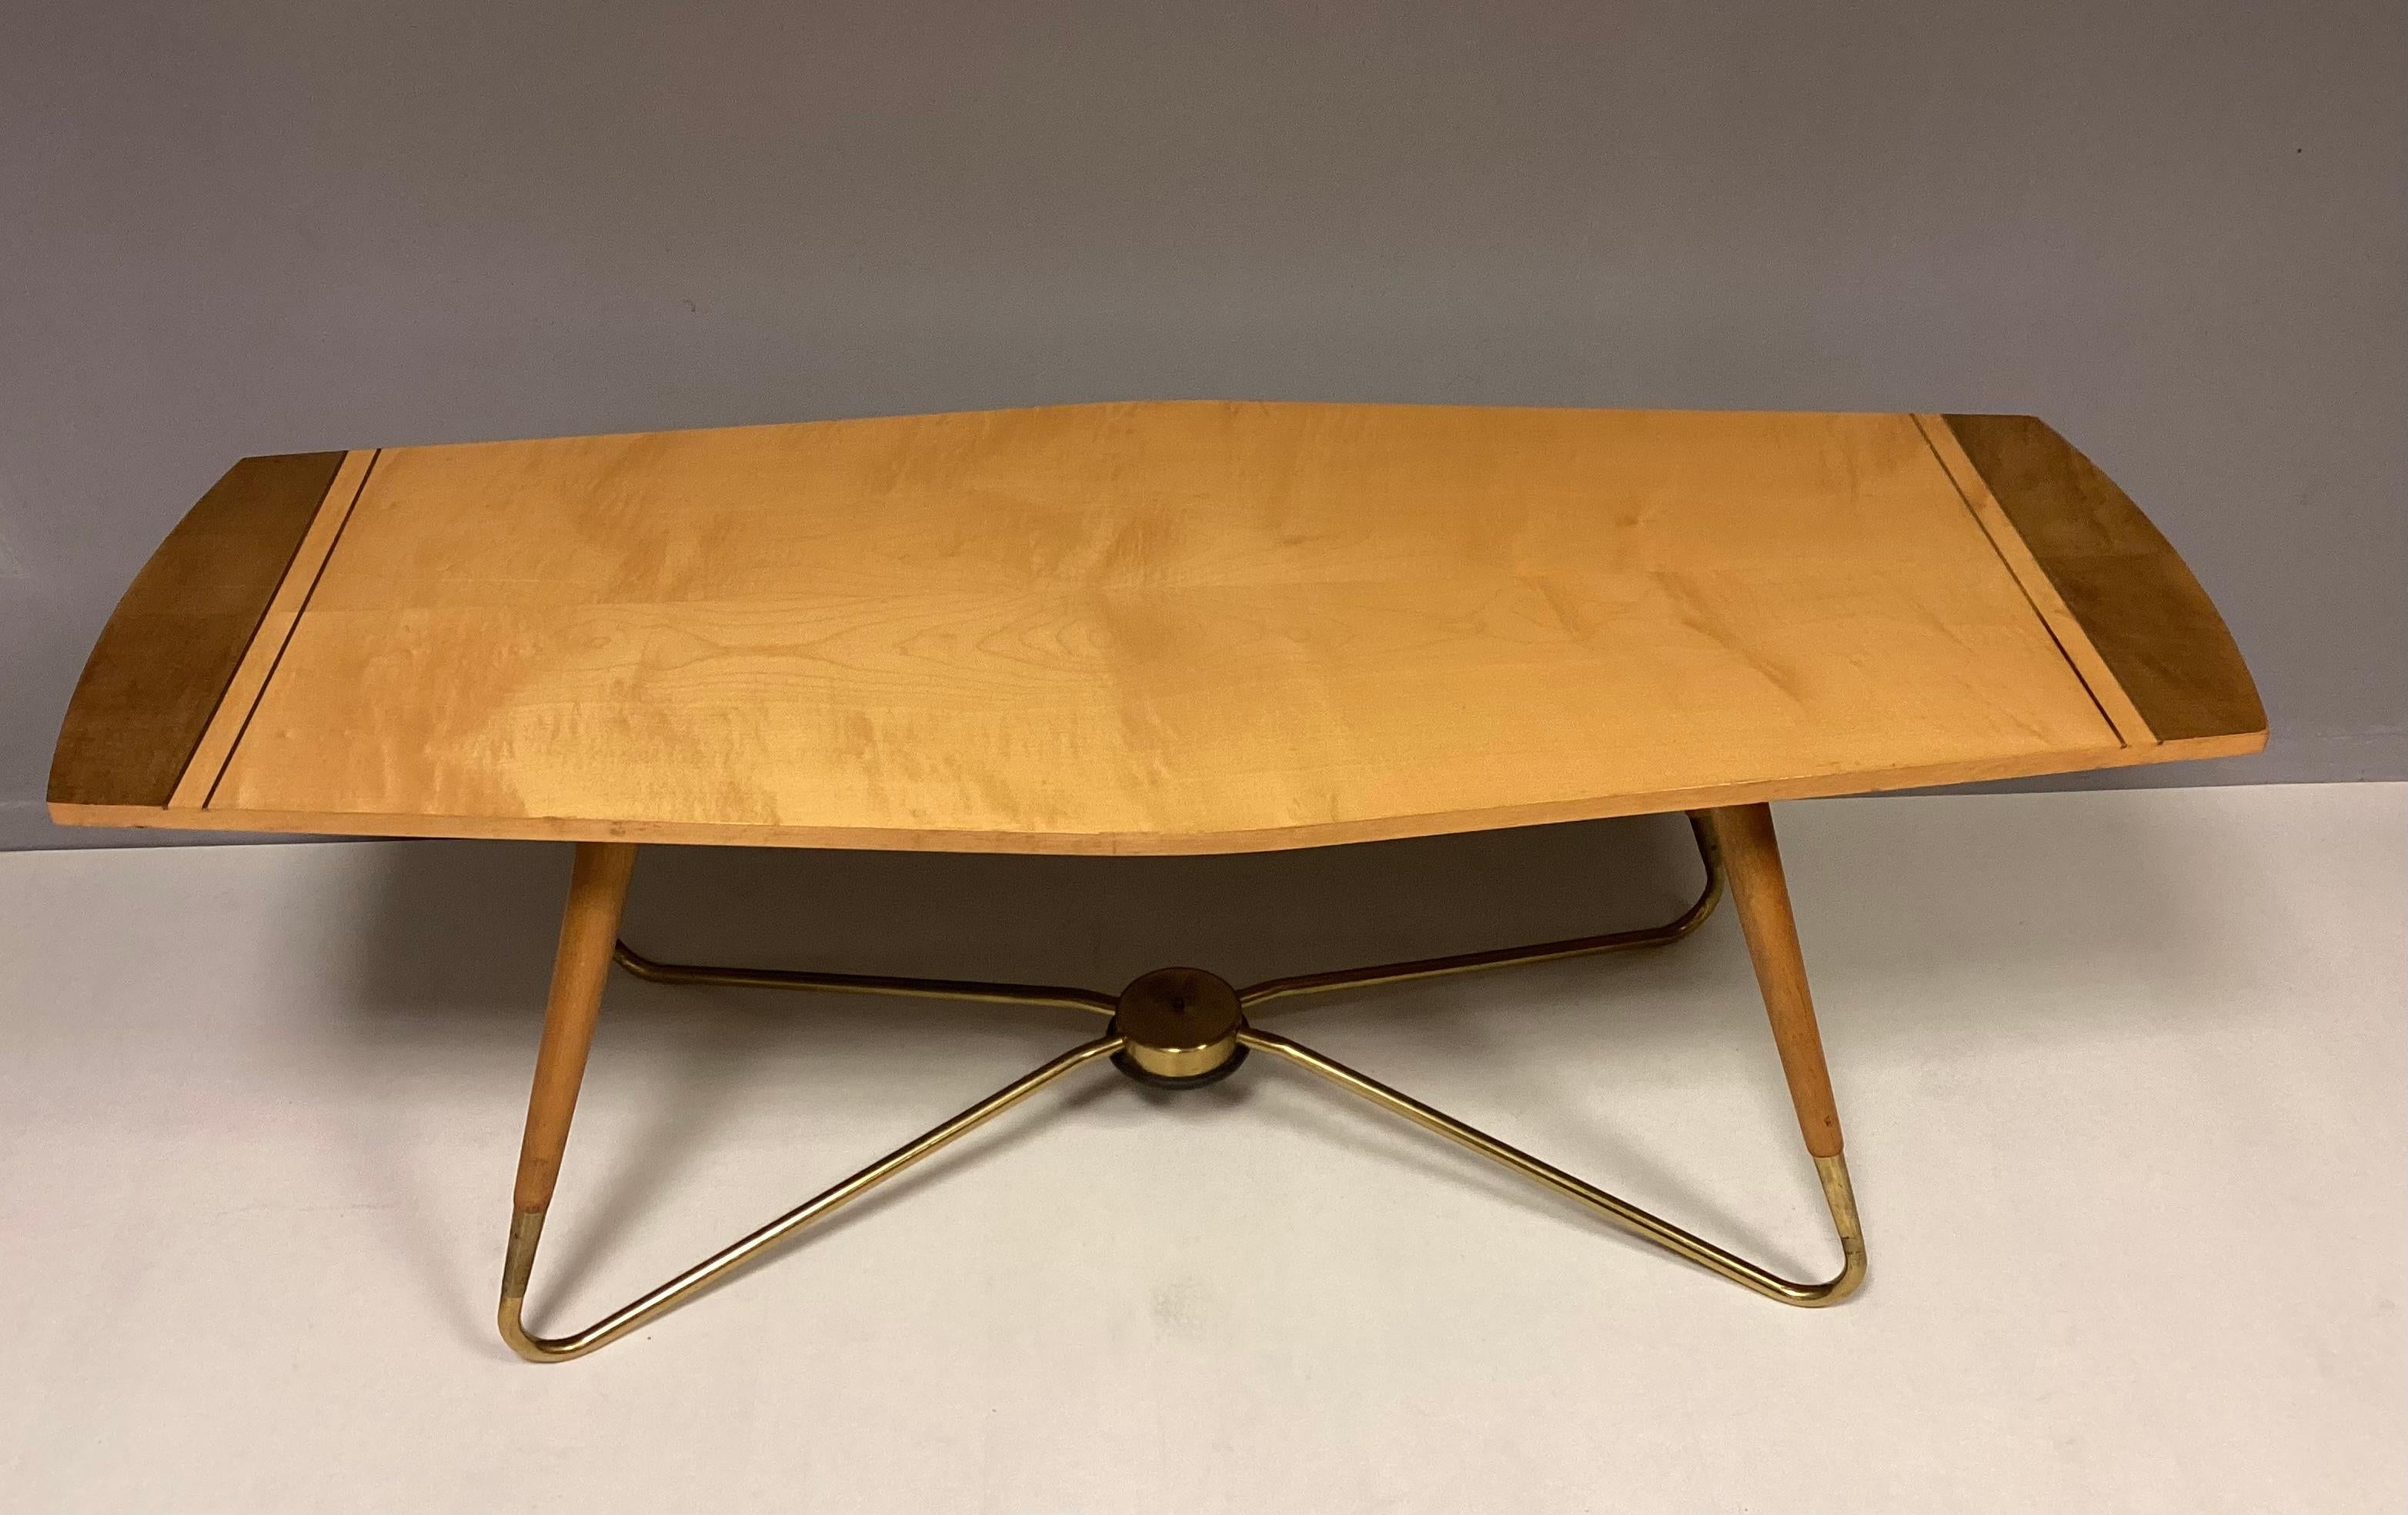 Very rare and nice coffee table from the 50s by Ilse Möbel. 
The table loop feet and plate has a very nice shape. In combination of wood and brass. There is a manufacturer's stamp on the underside.
The table is in a good condition.